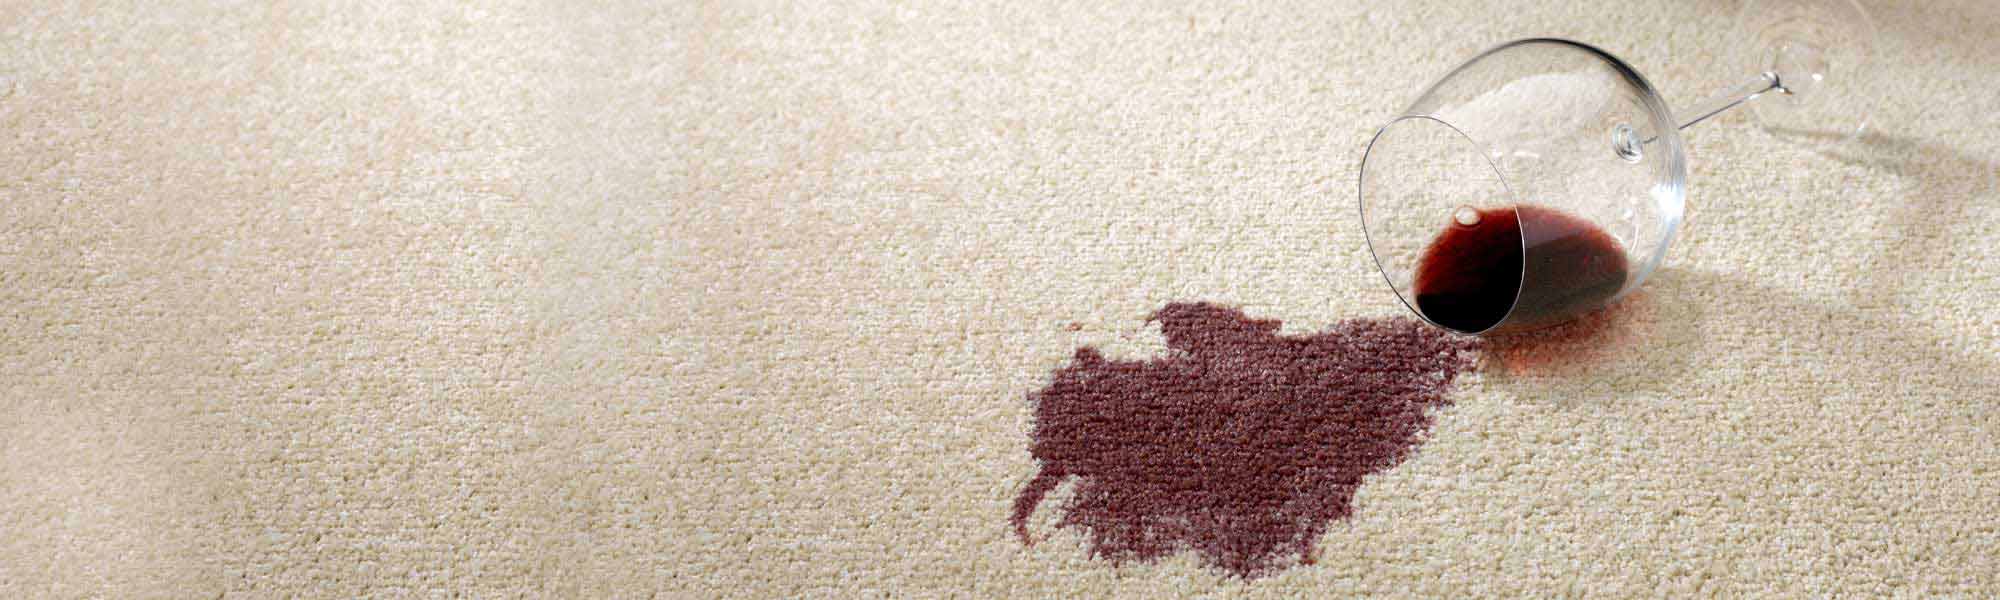 Professional Stain Removal Service in Clearwater & Largo